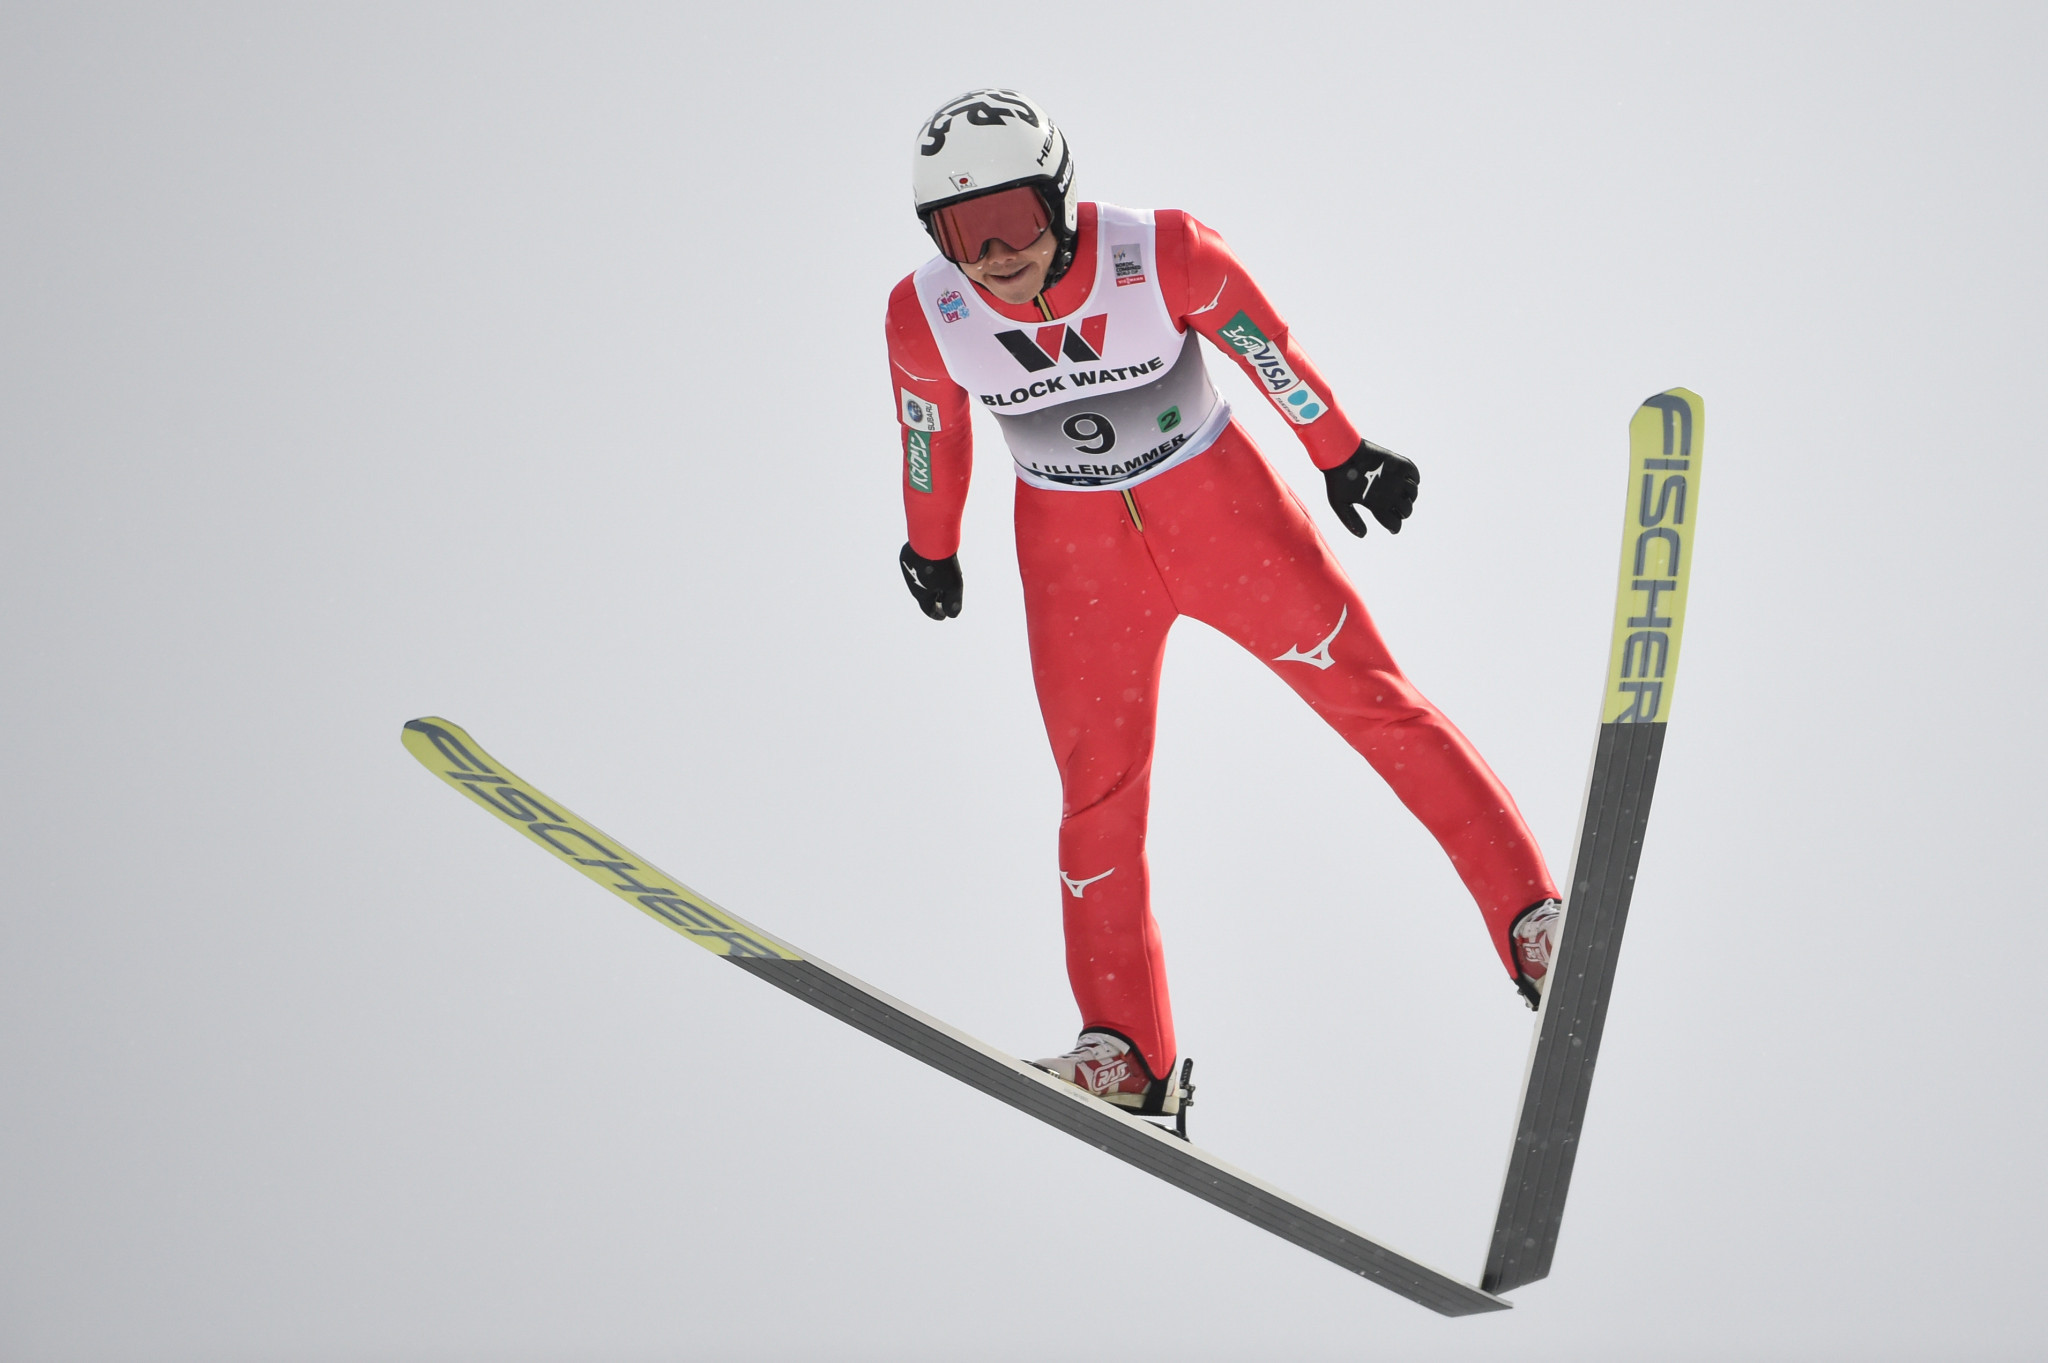 Taihei Kato won the ski jumping phase but faded during the ski ©Getty Images 